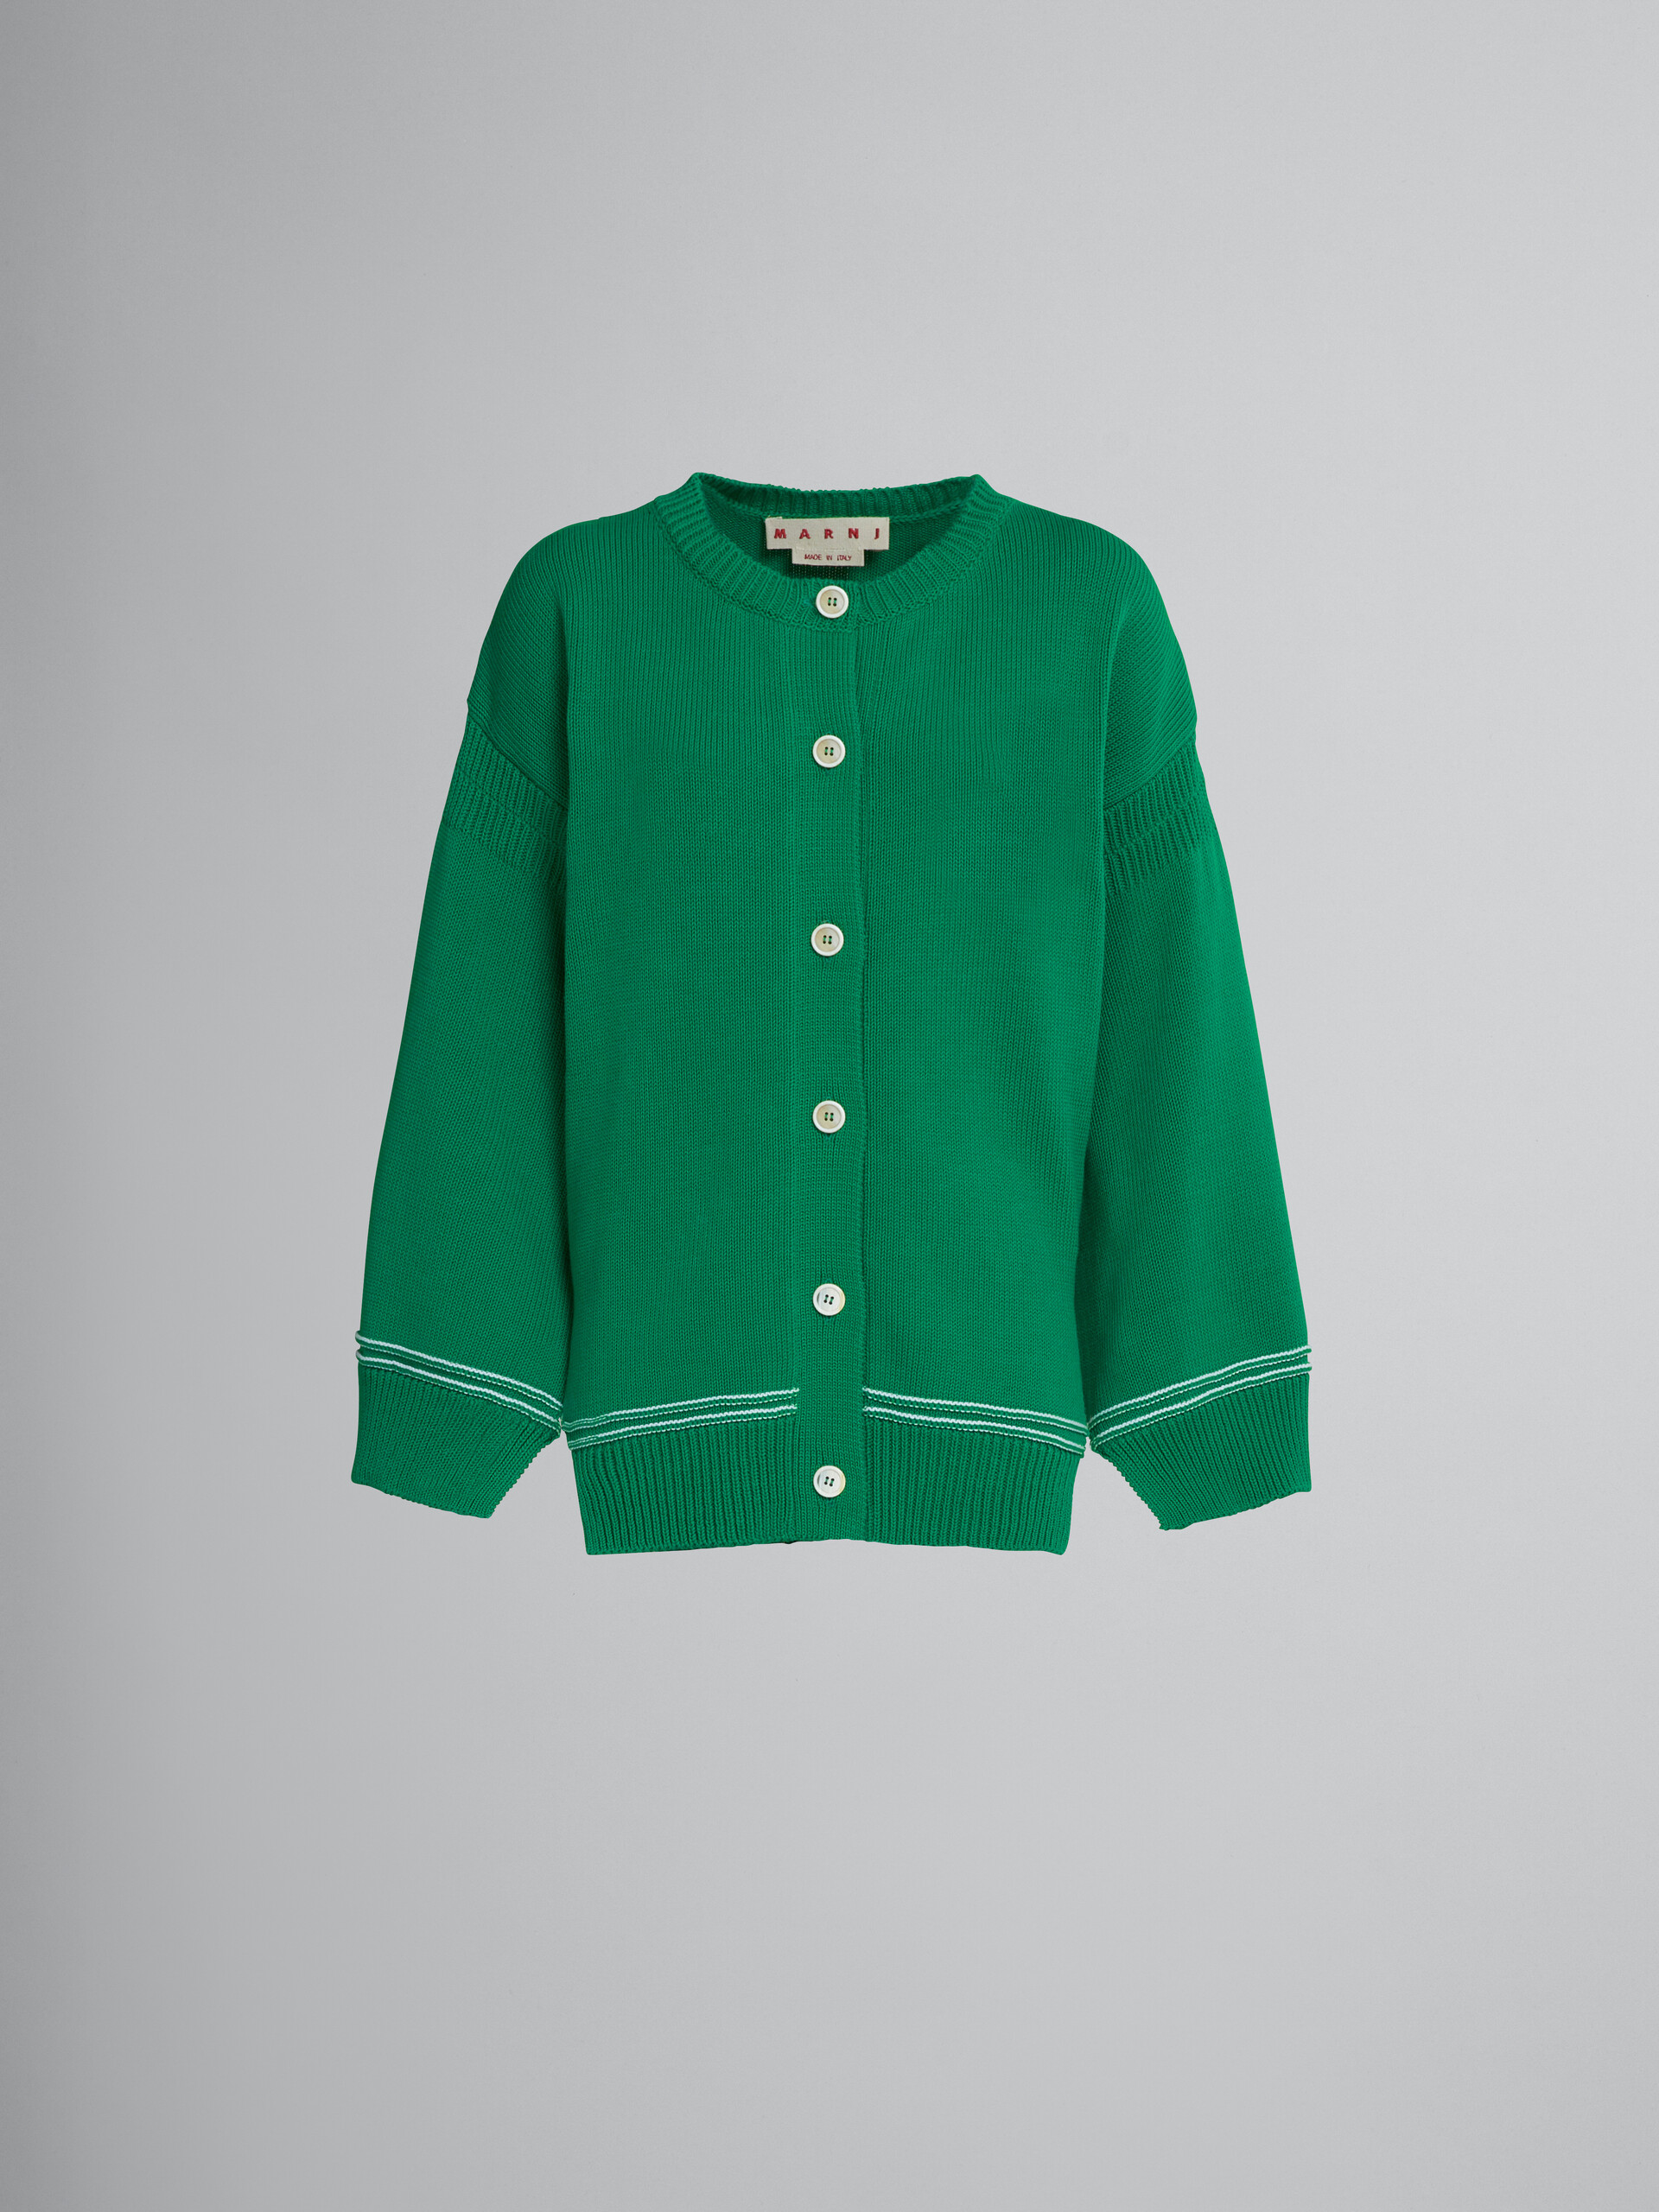 Green cotton cardigan with logo - Pullovers - Image 1